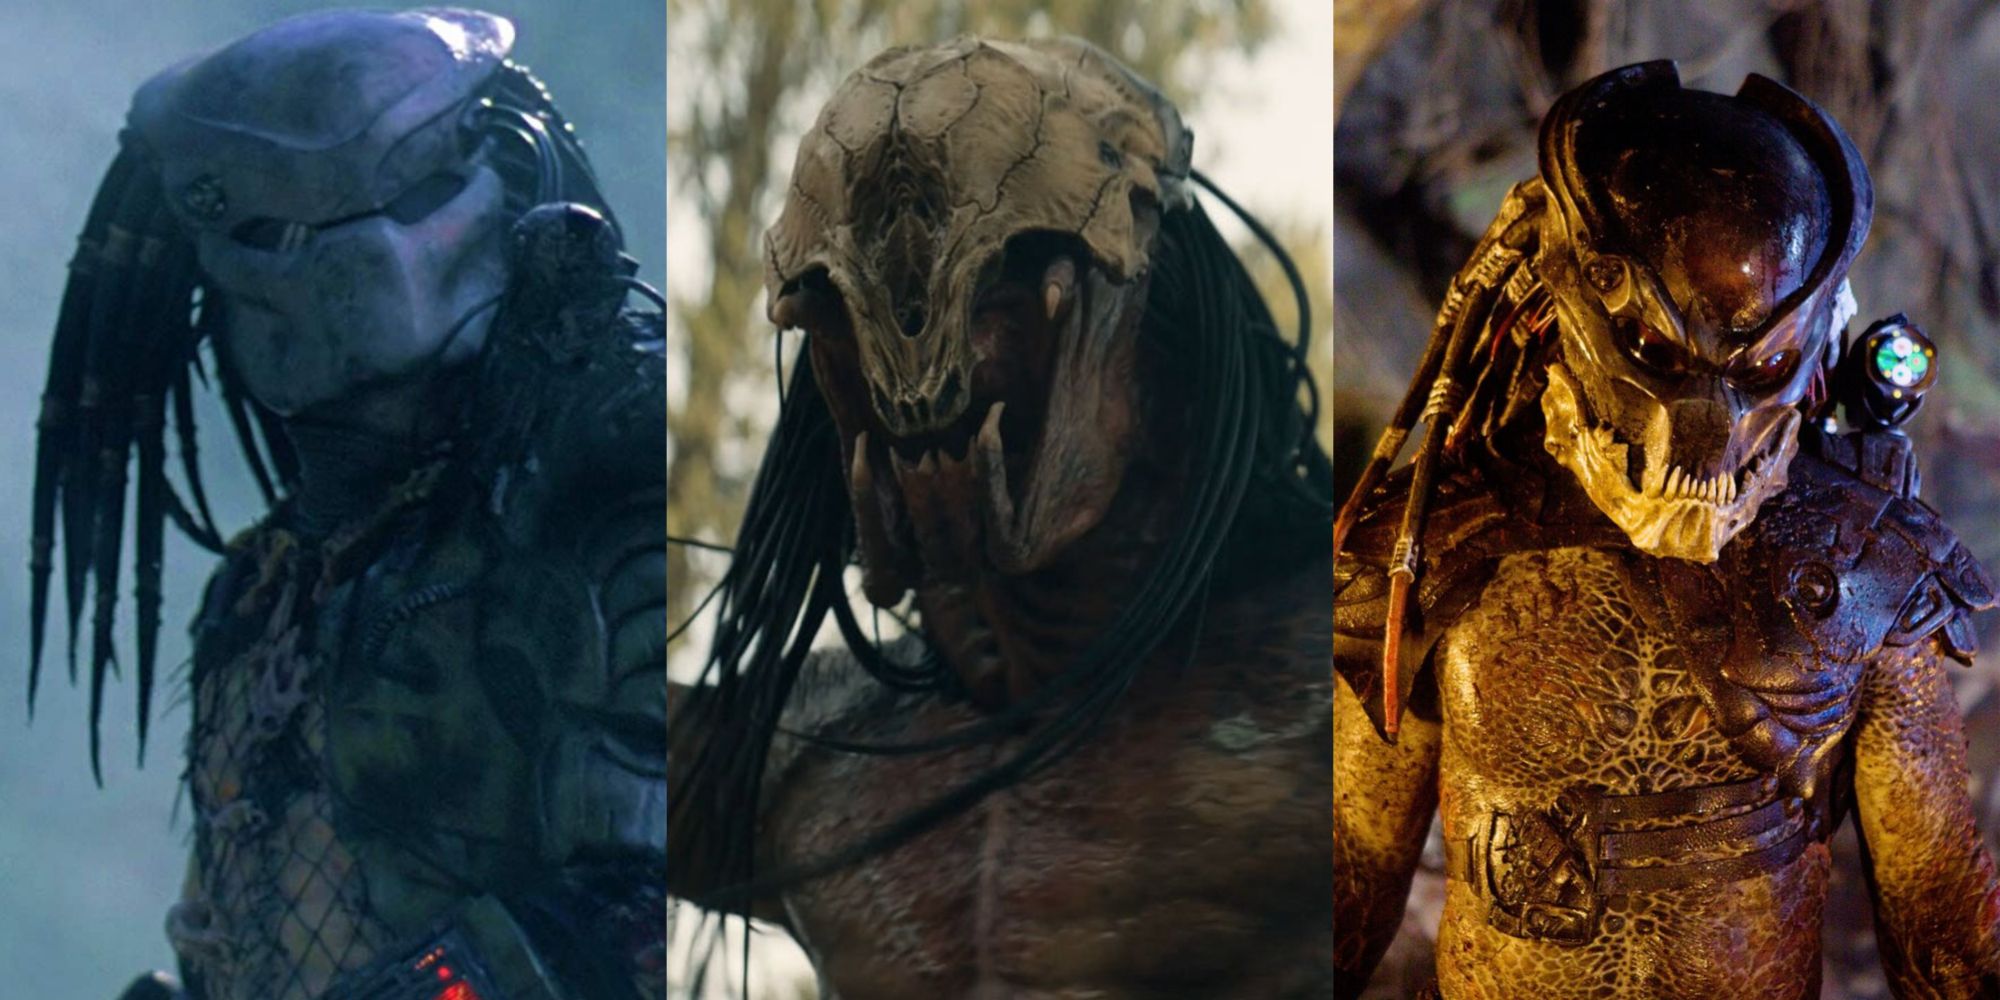 How to Watch All the Predator Movies in Order on Hulu